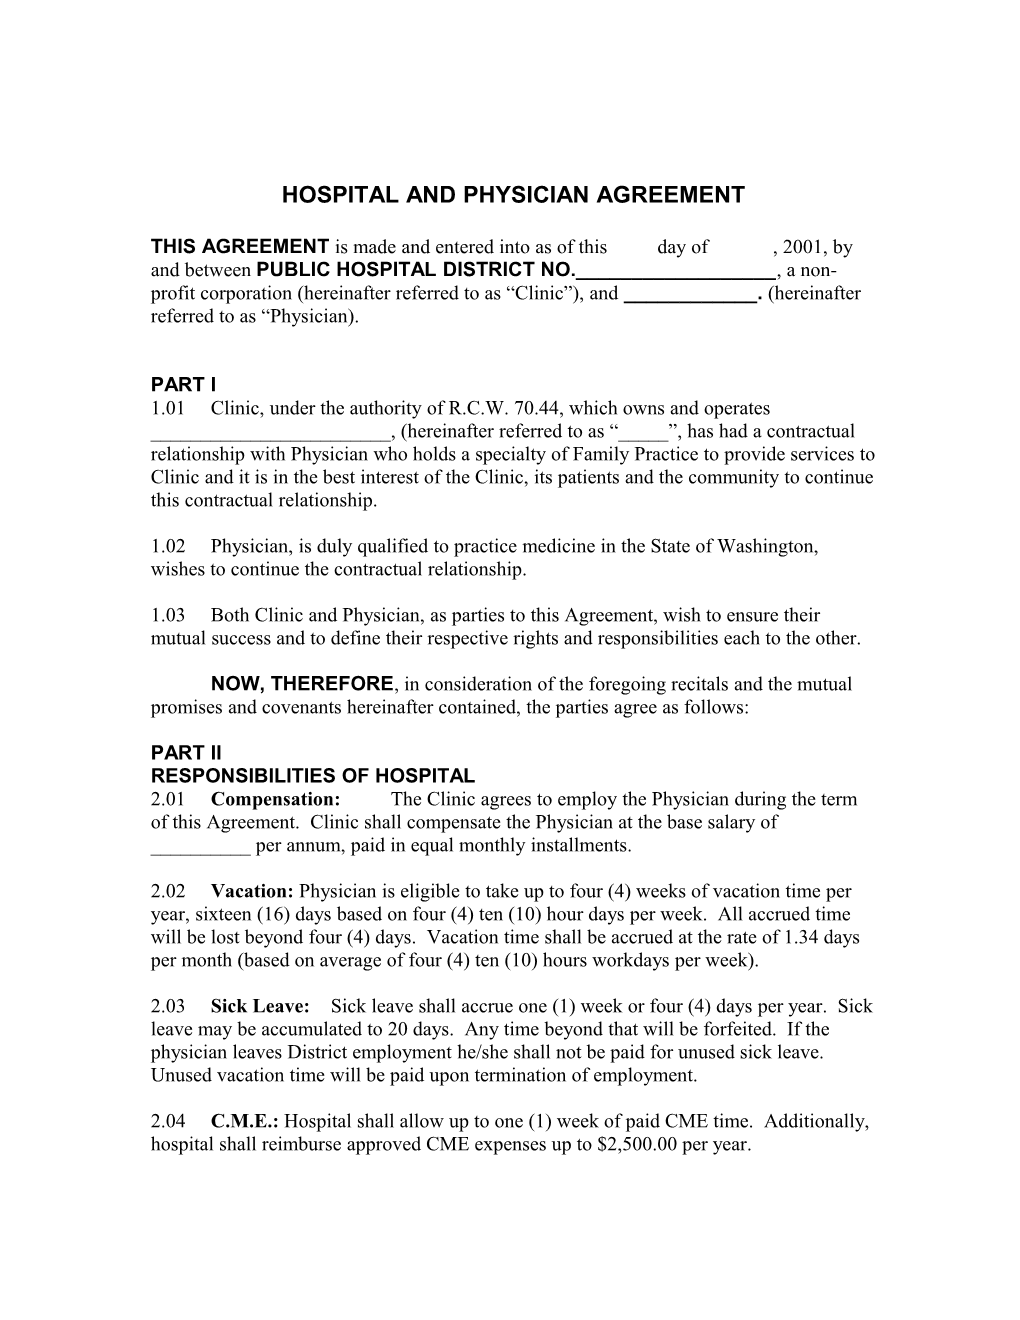 Hospital and Physician Agreement